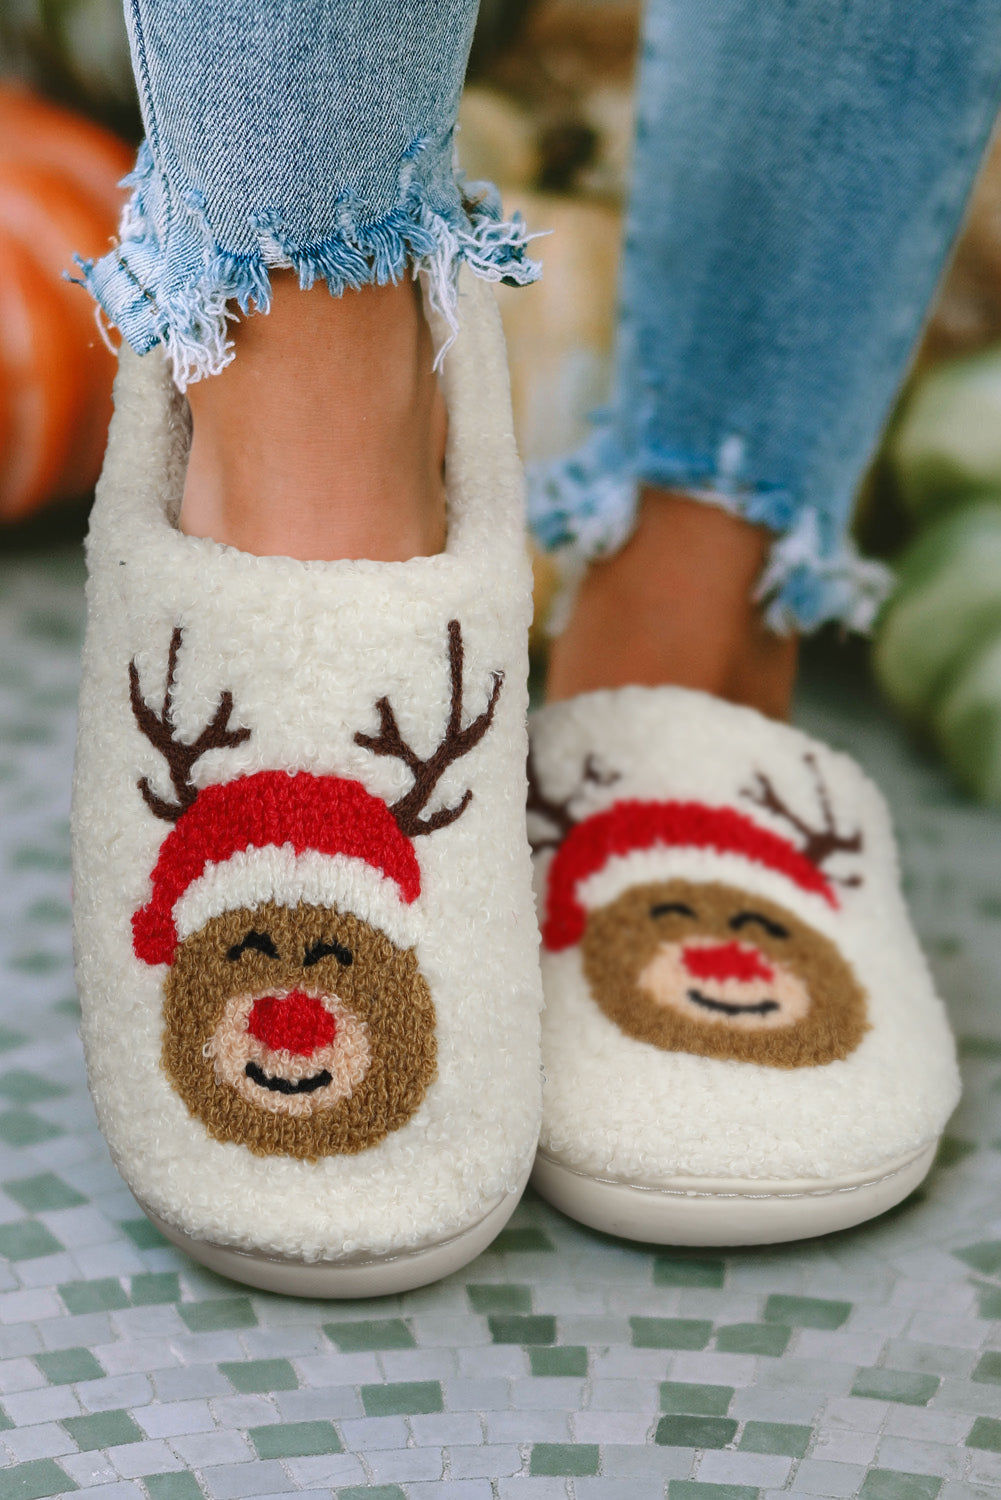 Racing Red Western Graphic Embroidered Sherpa Home Slippers